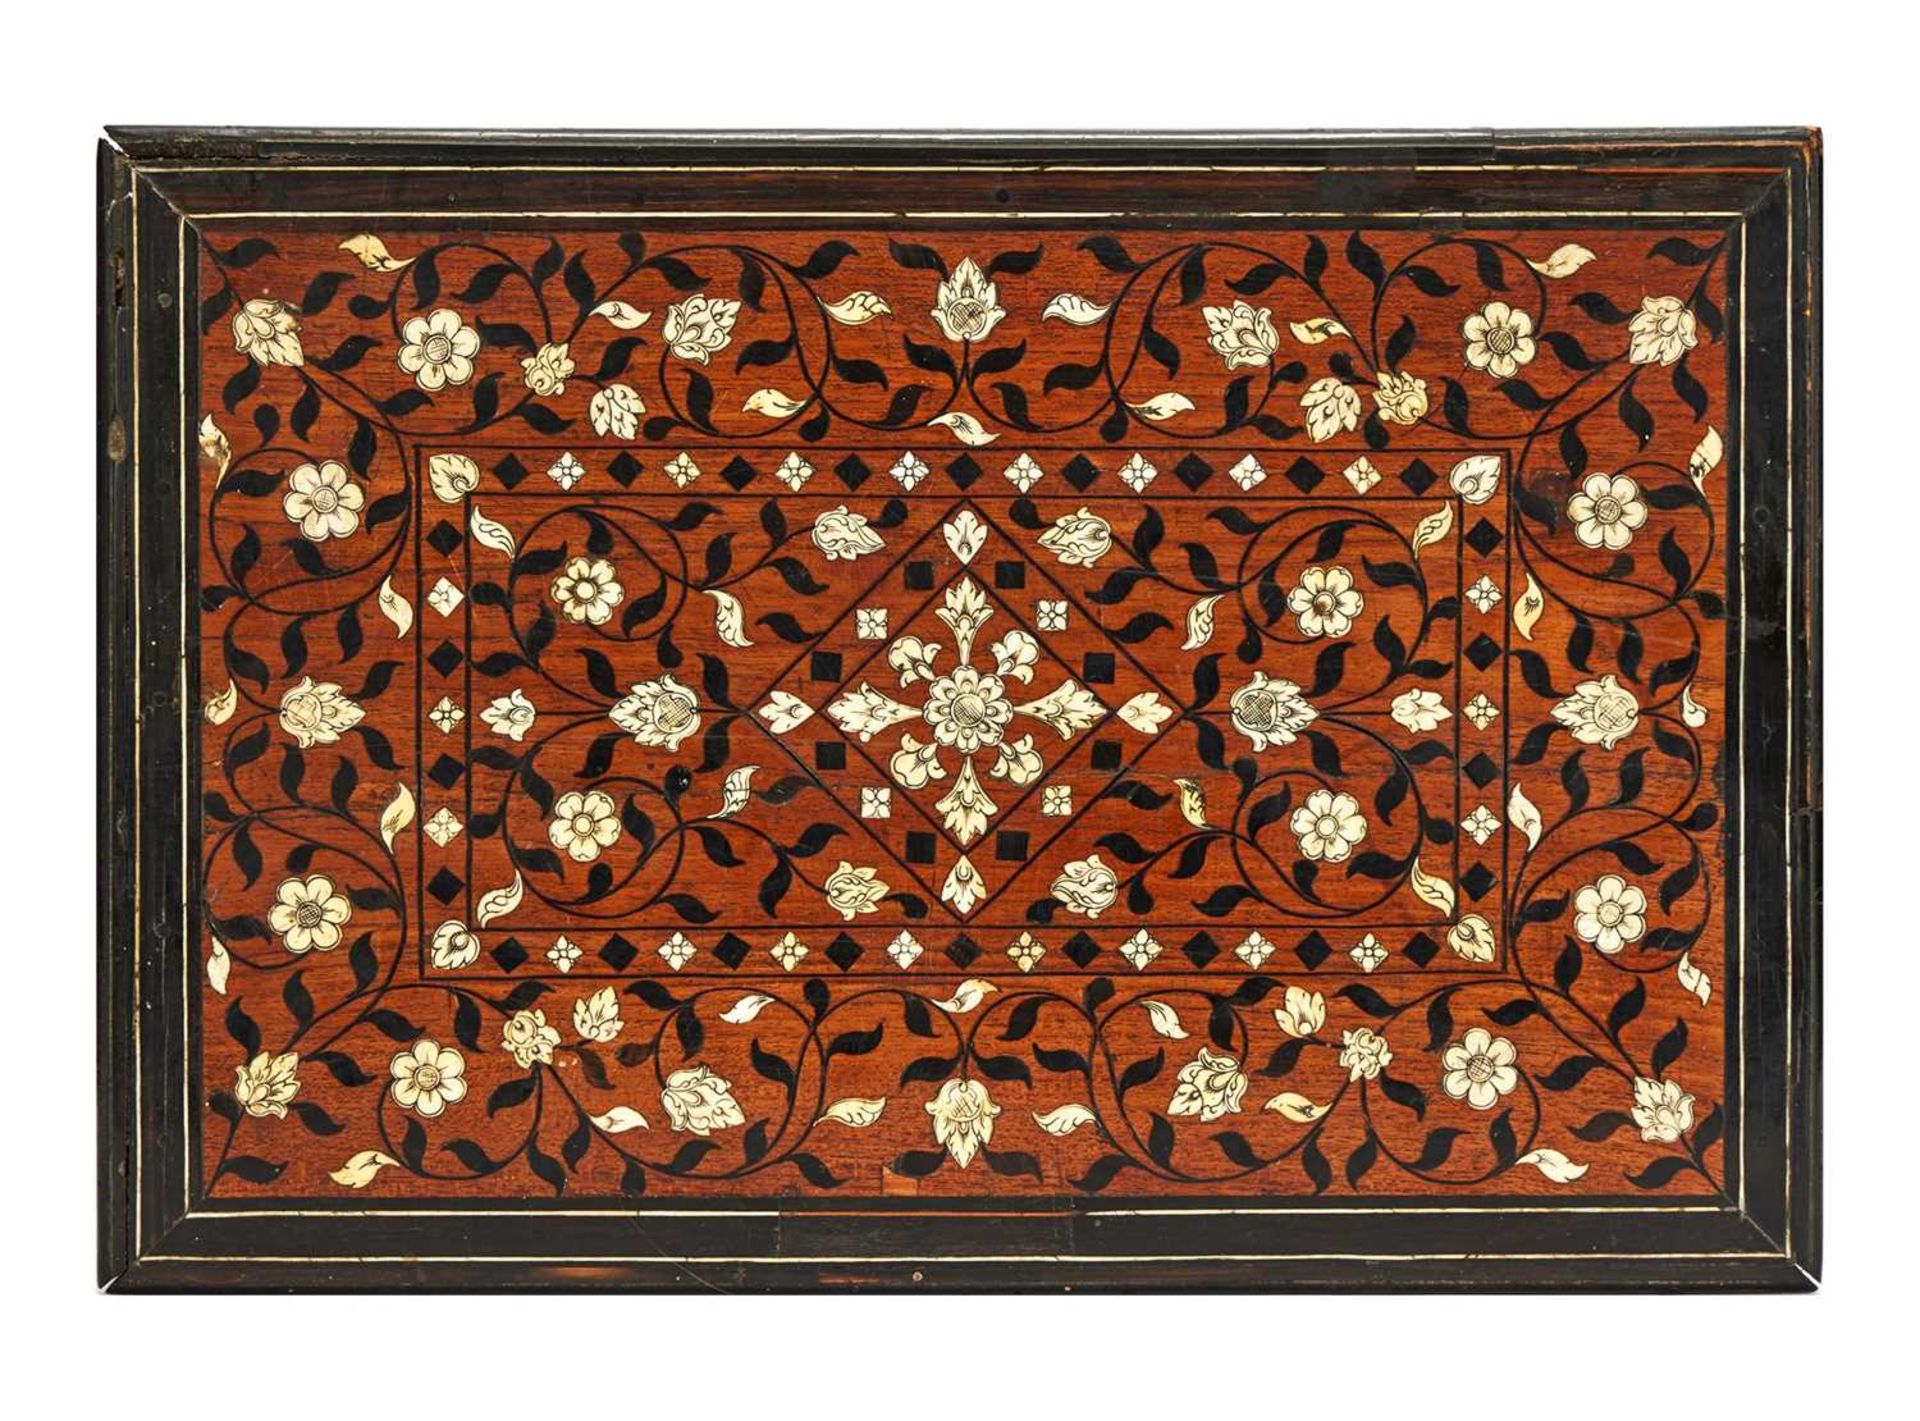 AN EARLY 18TH CENTURY ANGLO-INDIAN IVORY INLAID WORK BOX, PROBABLY GUJARAT - Image 2 of 2